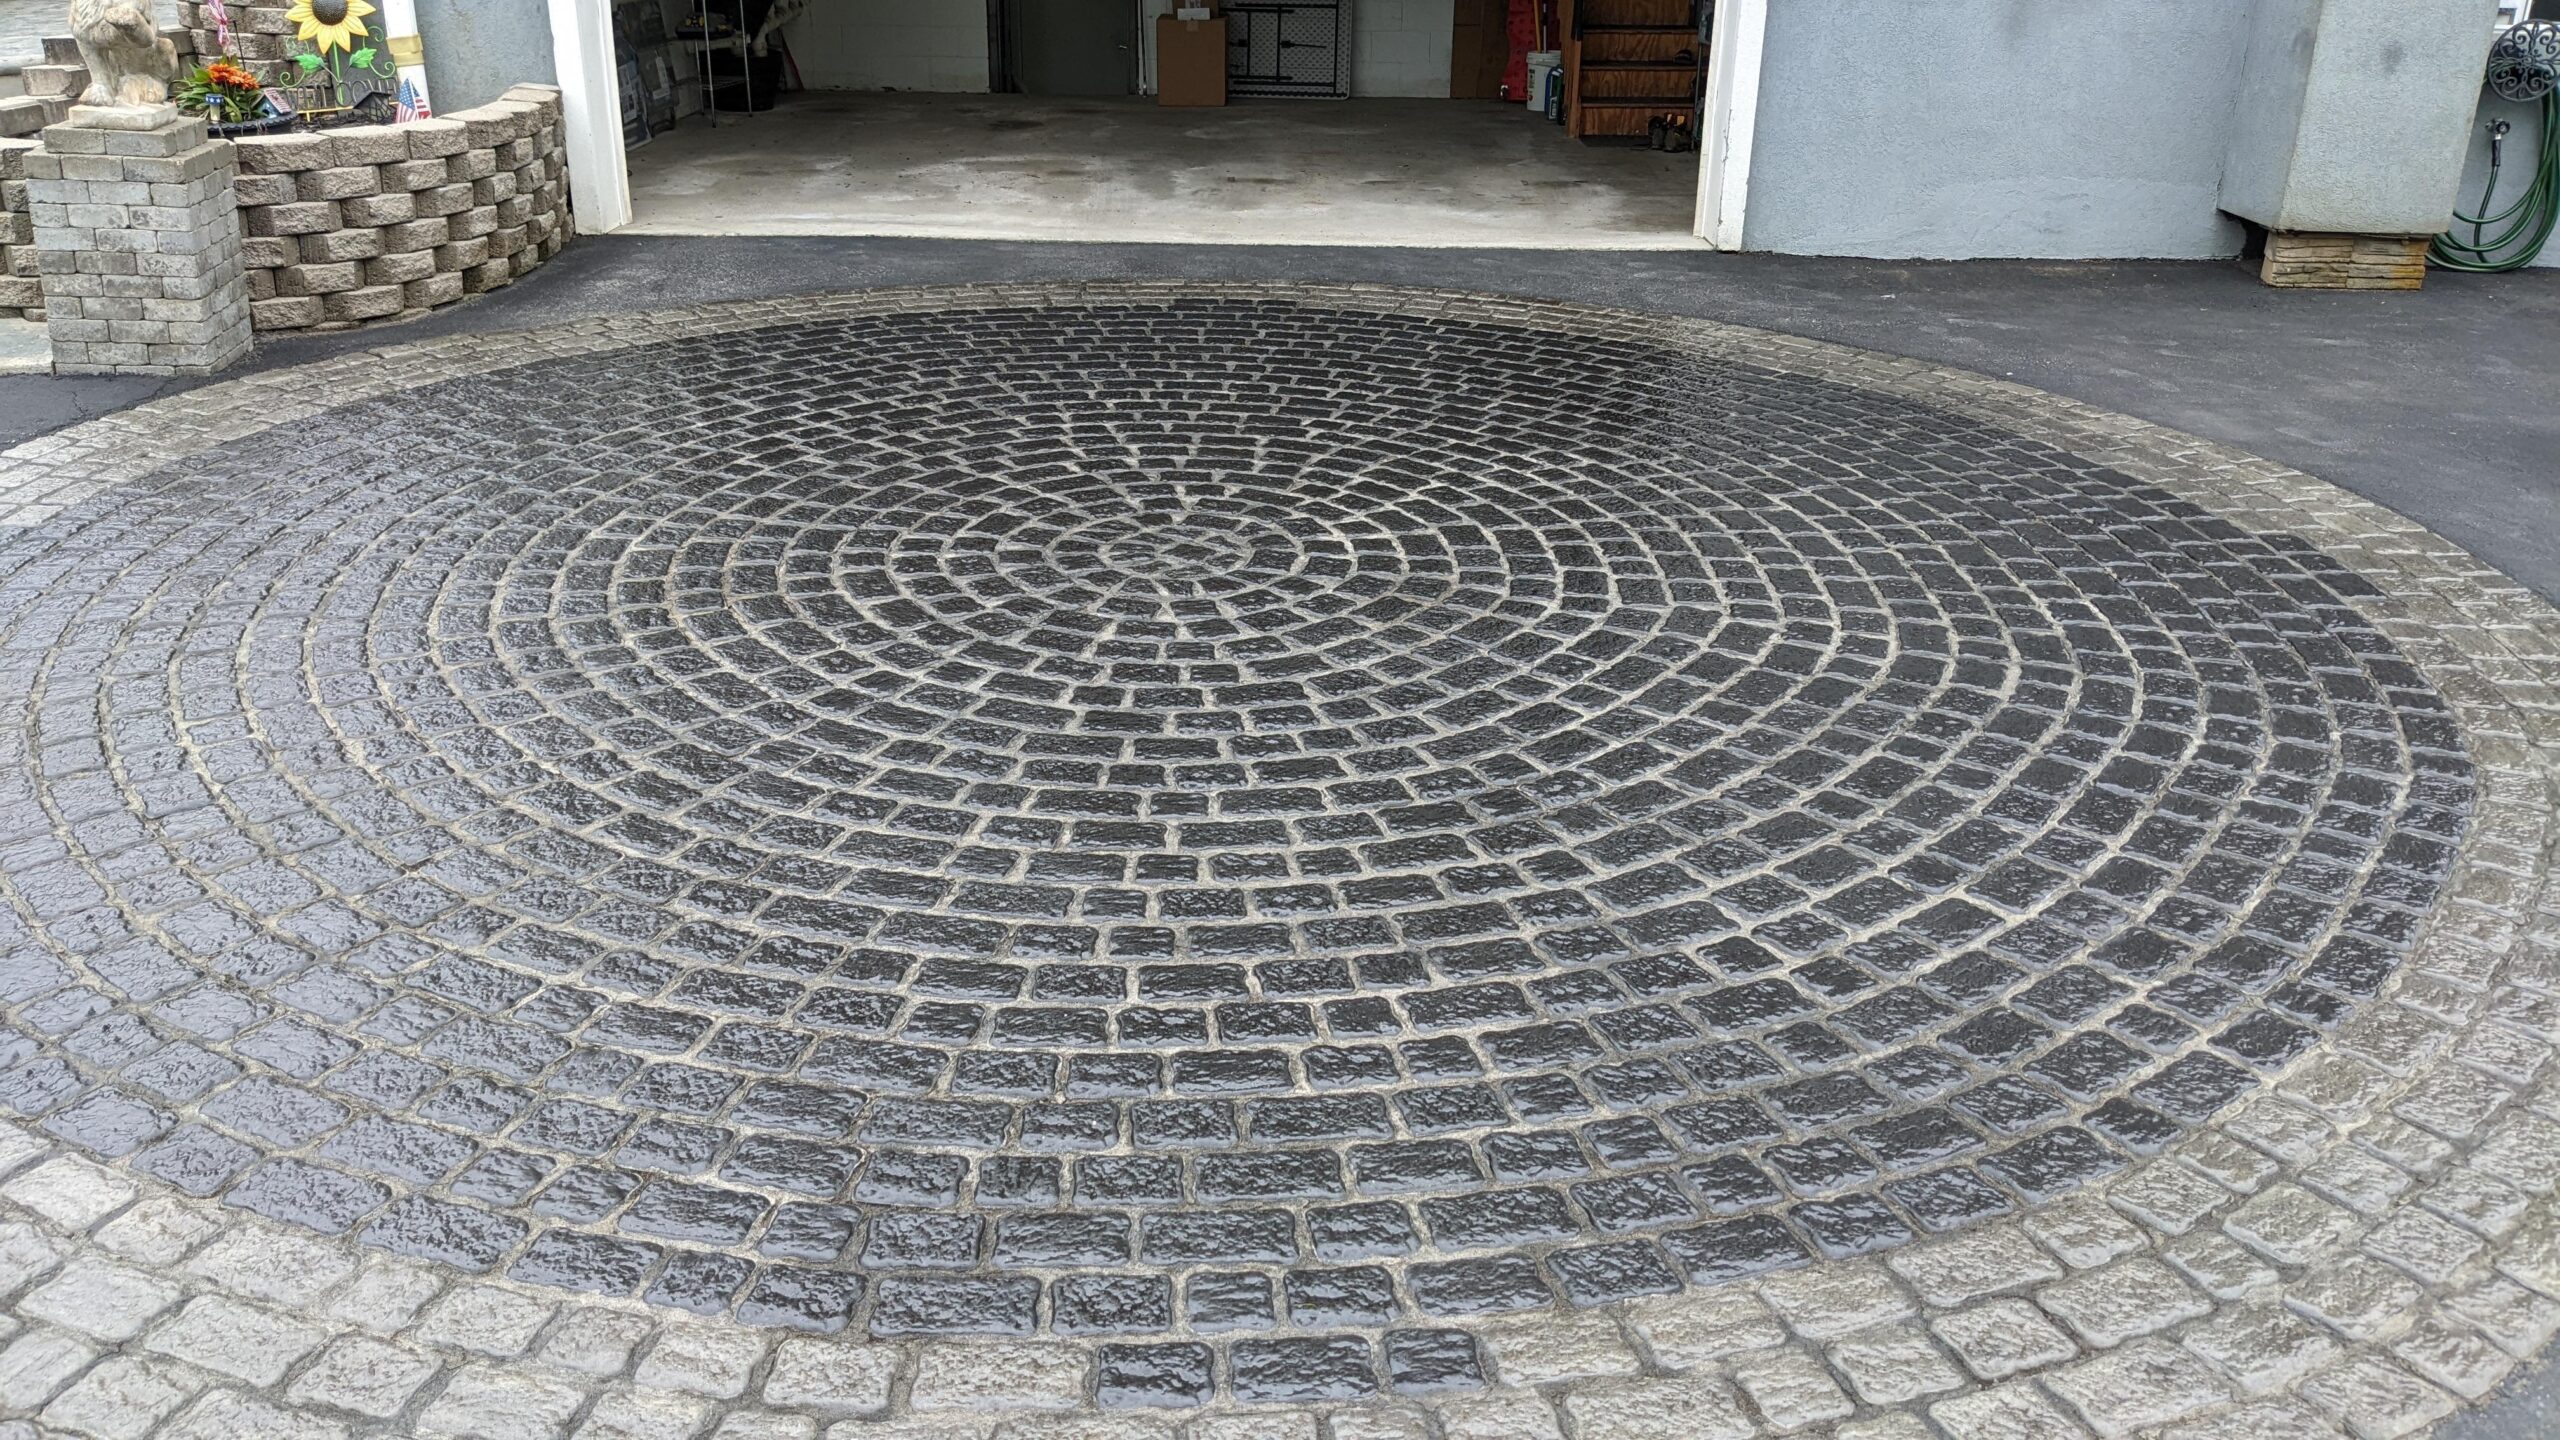 Circular paver design stained with gloss EasyTint black